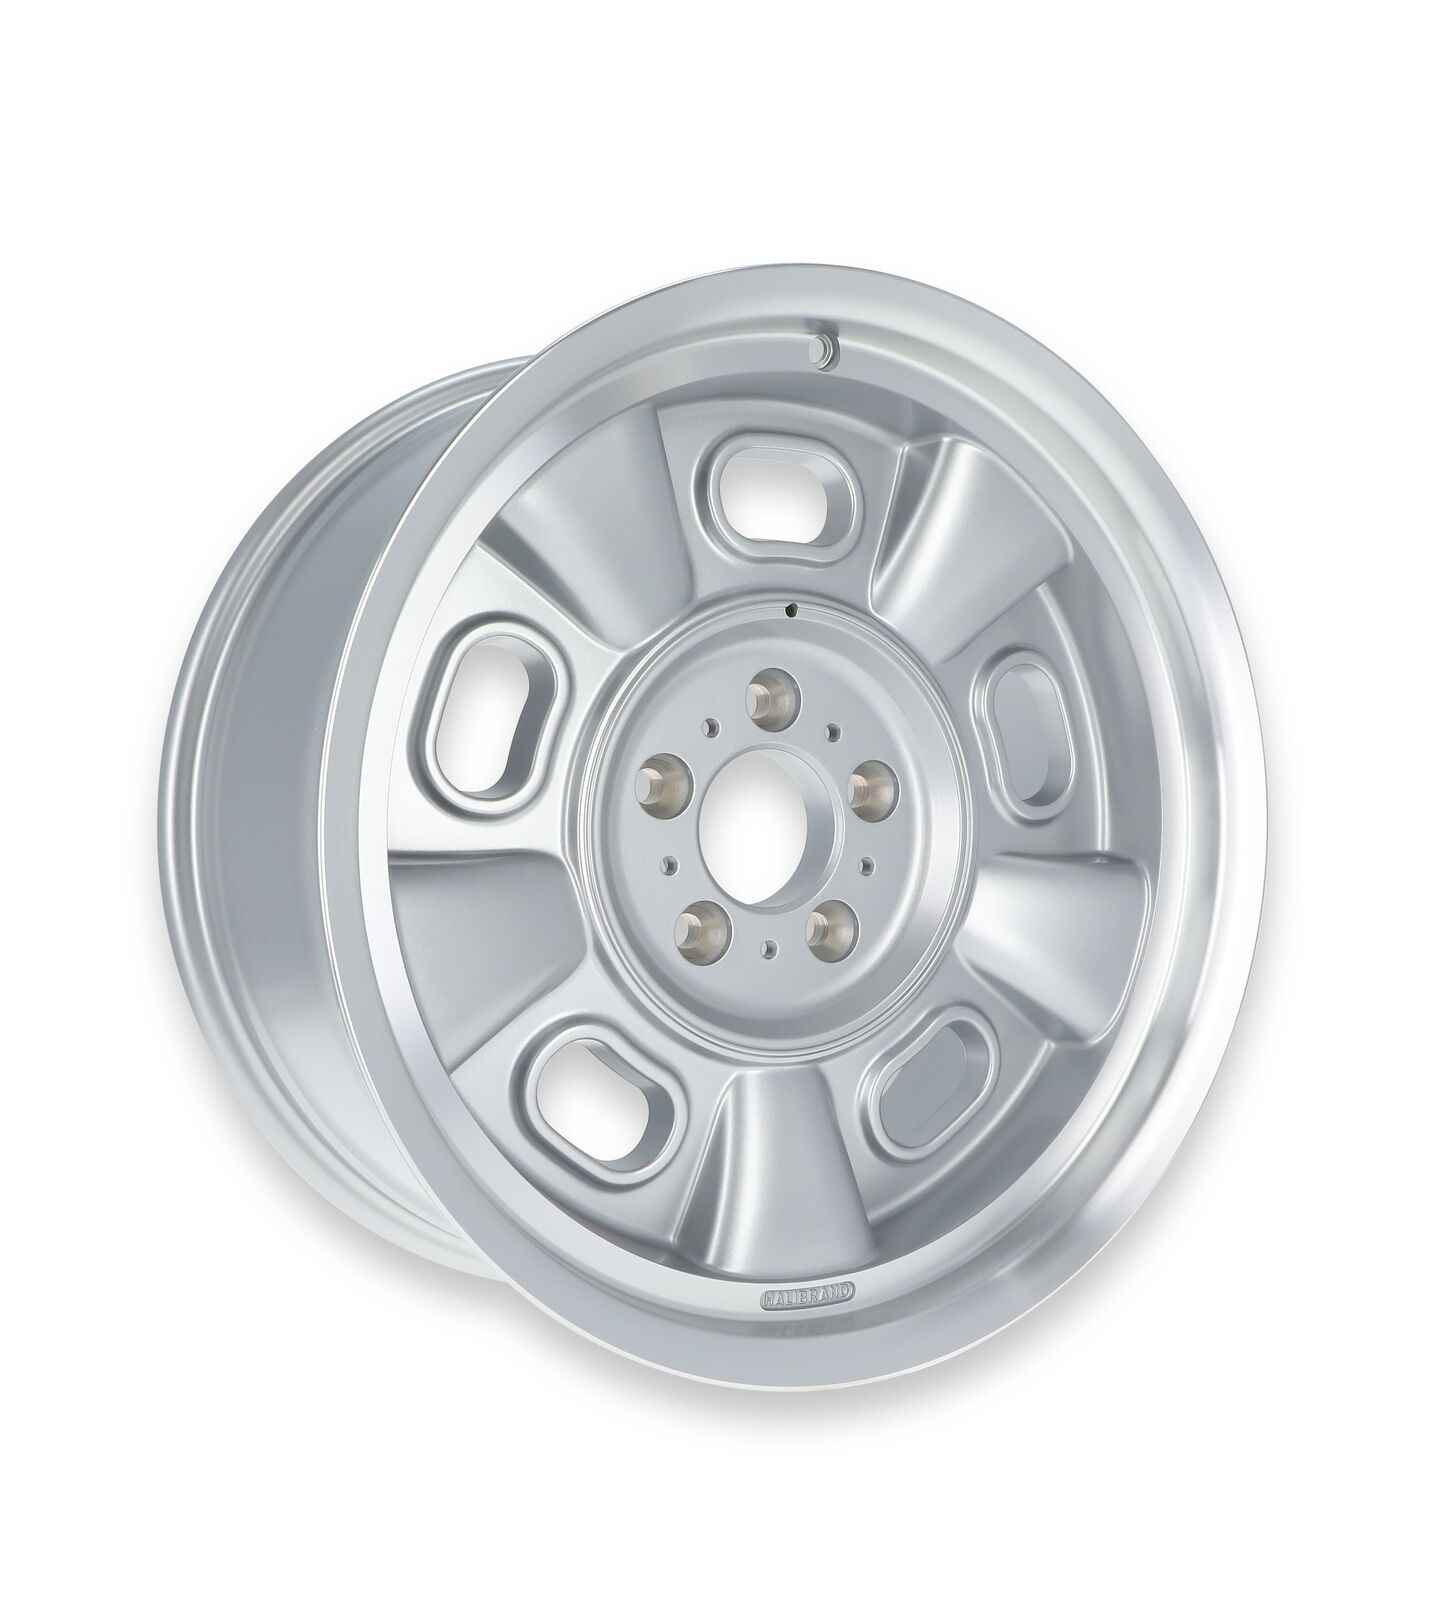 Halibrand HB002-007 Indy Roadster Wheel 19x8.5 - 5.25 bs Silver Machined - Each